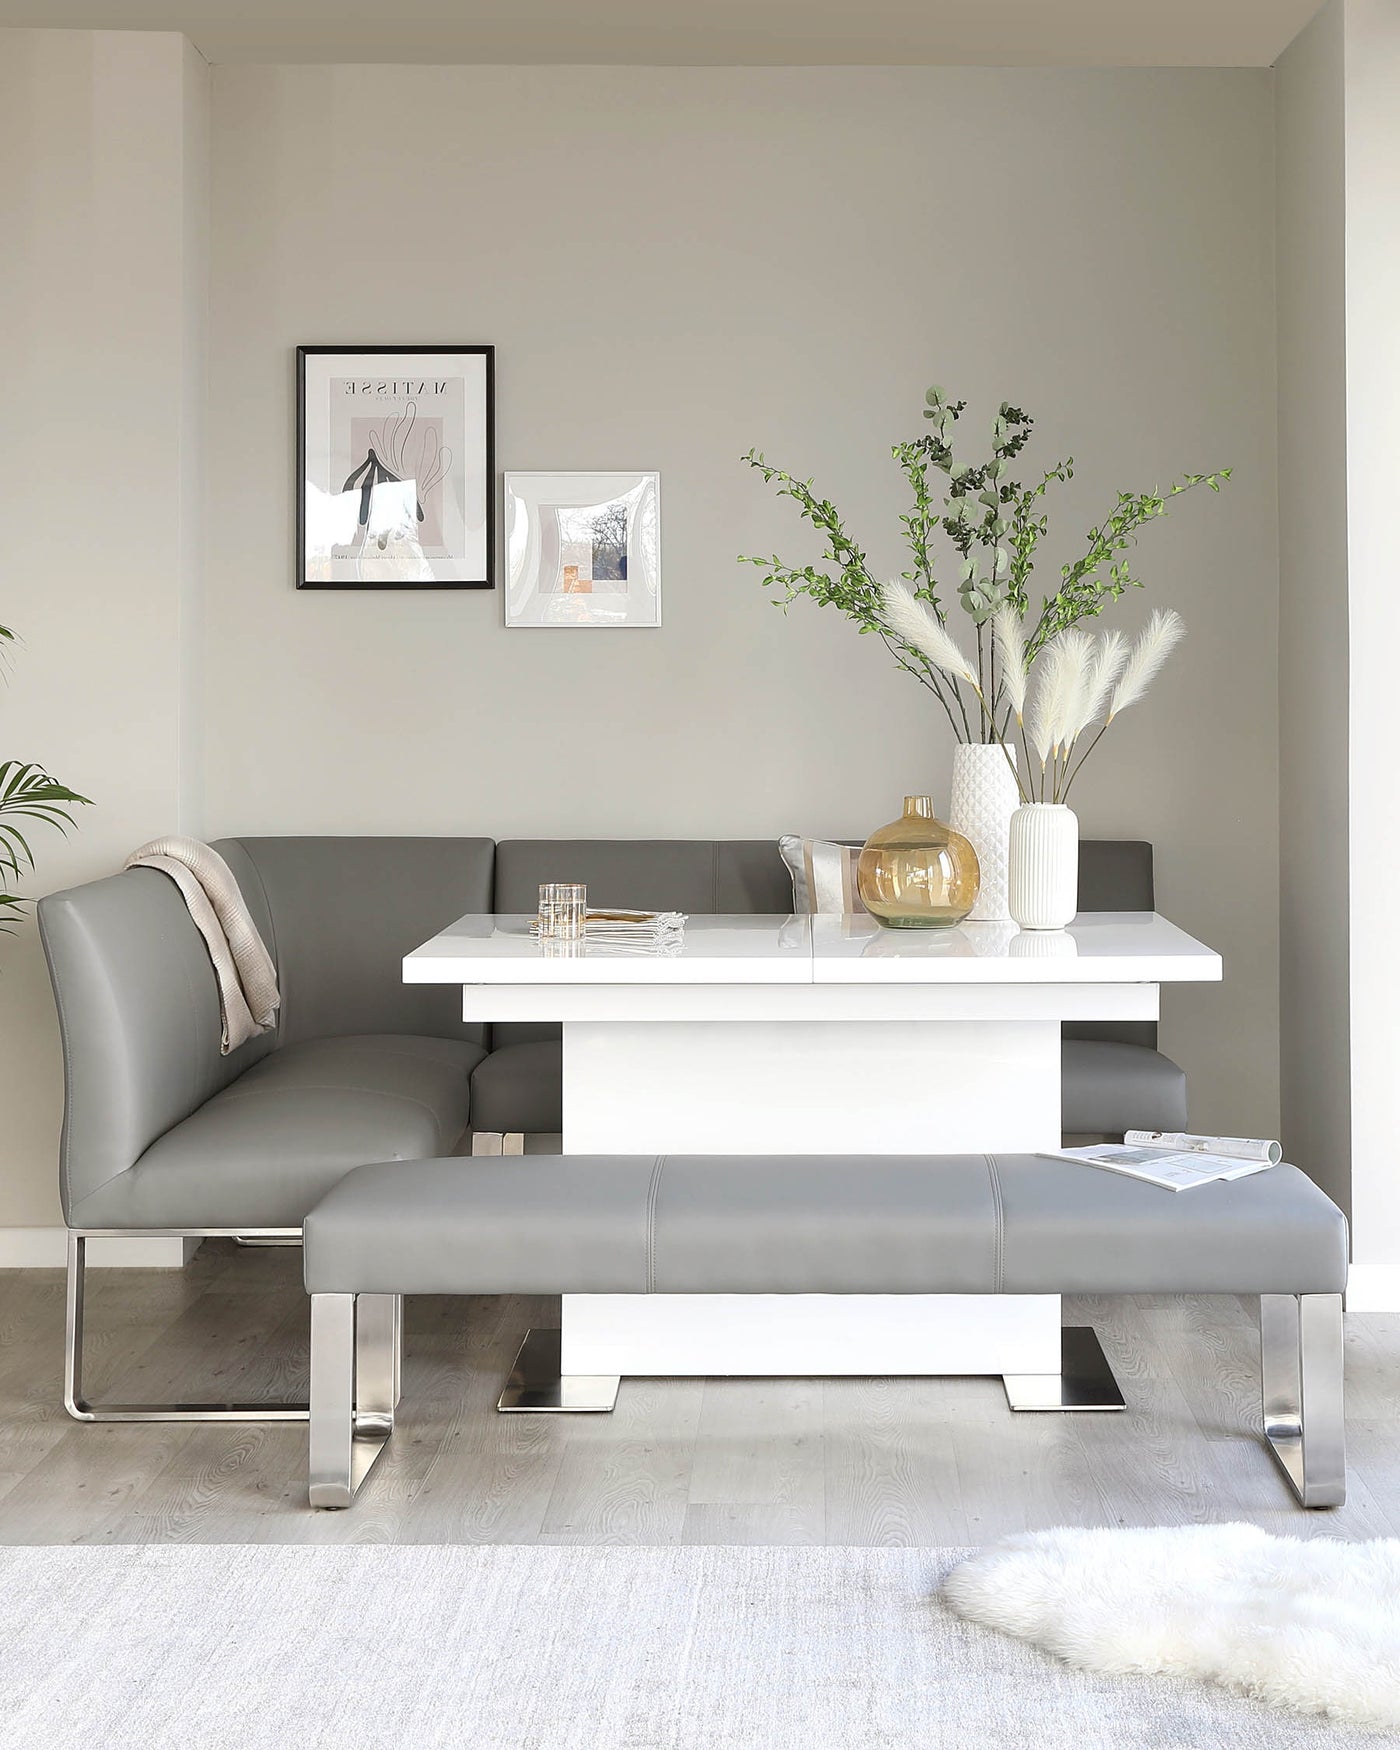 Modern dining area featuring a white, minimalistic dining table with a matching bench and grey upholstered L-shaped corner seat with metal accents on the legs.